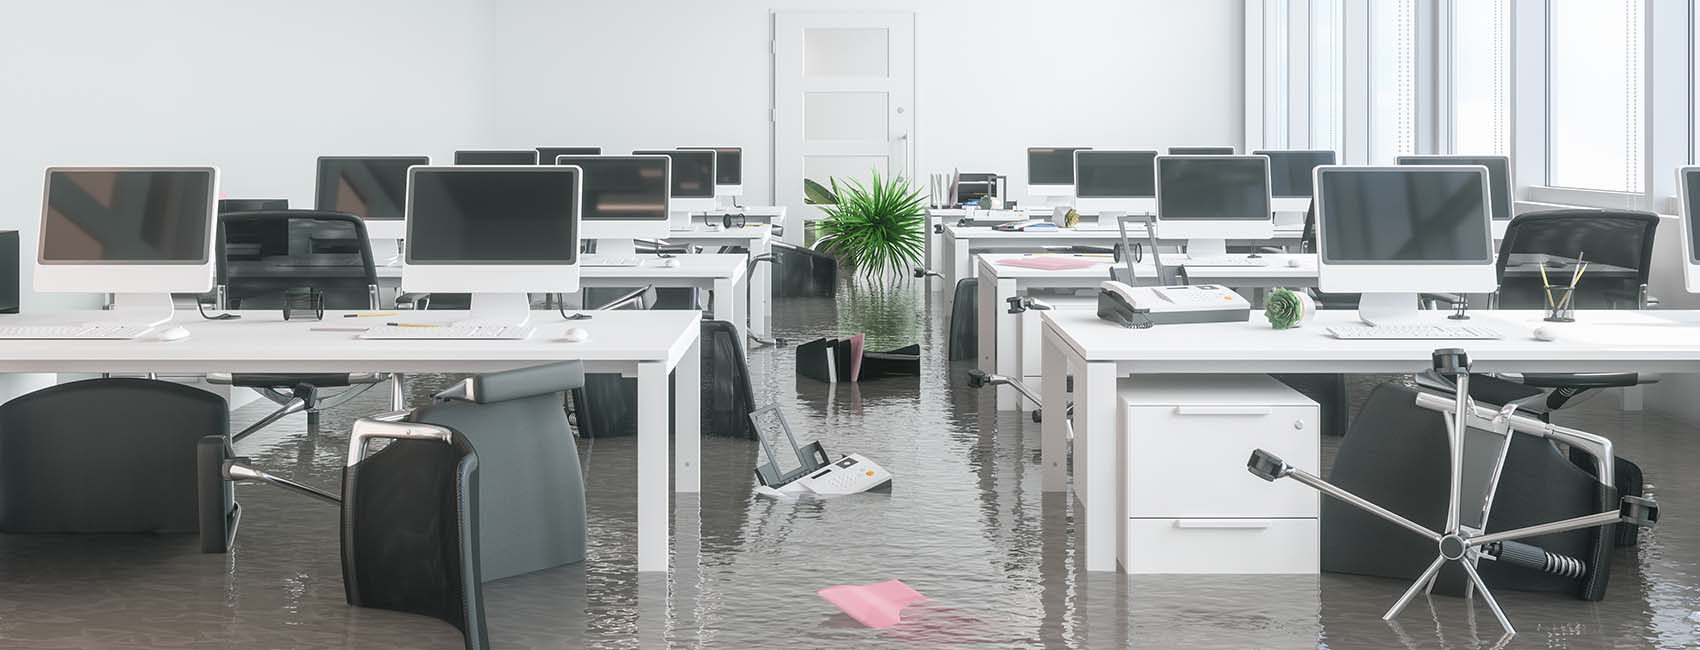 Flooded office